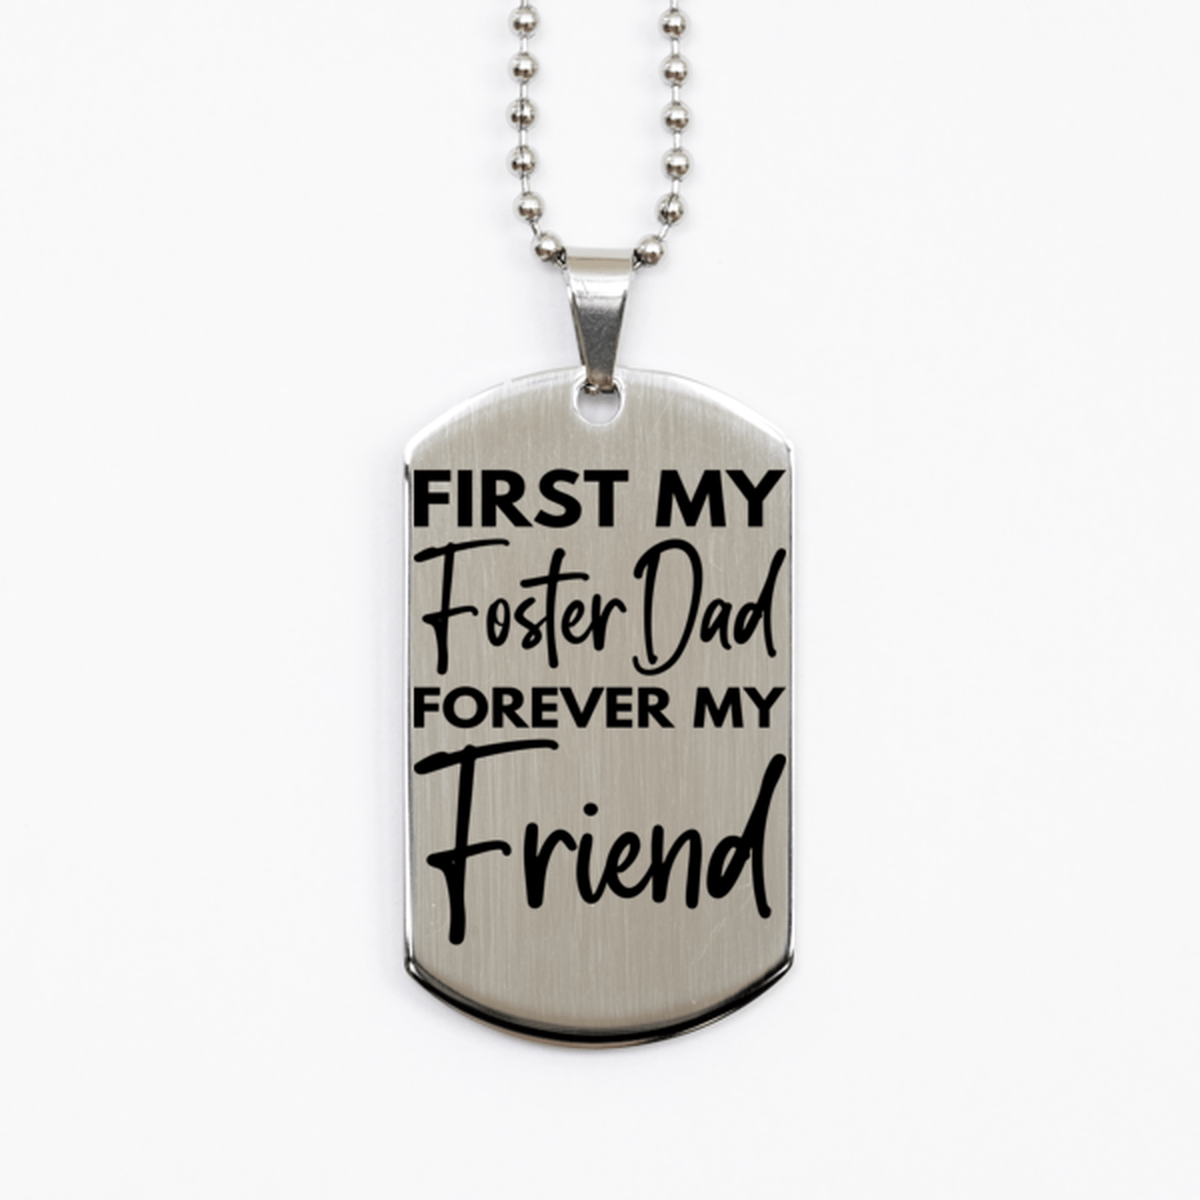 Inspirational Foster Dad Silver Dog Tag Necklace, First My Foster Dad Forever My Friend, Best Birthday Gifts for Foster Dad